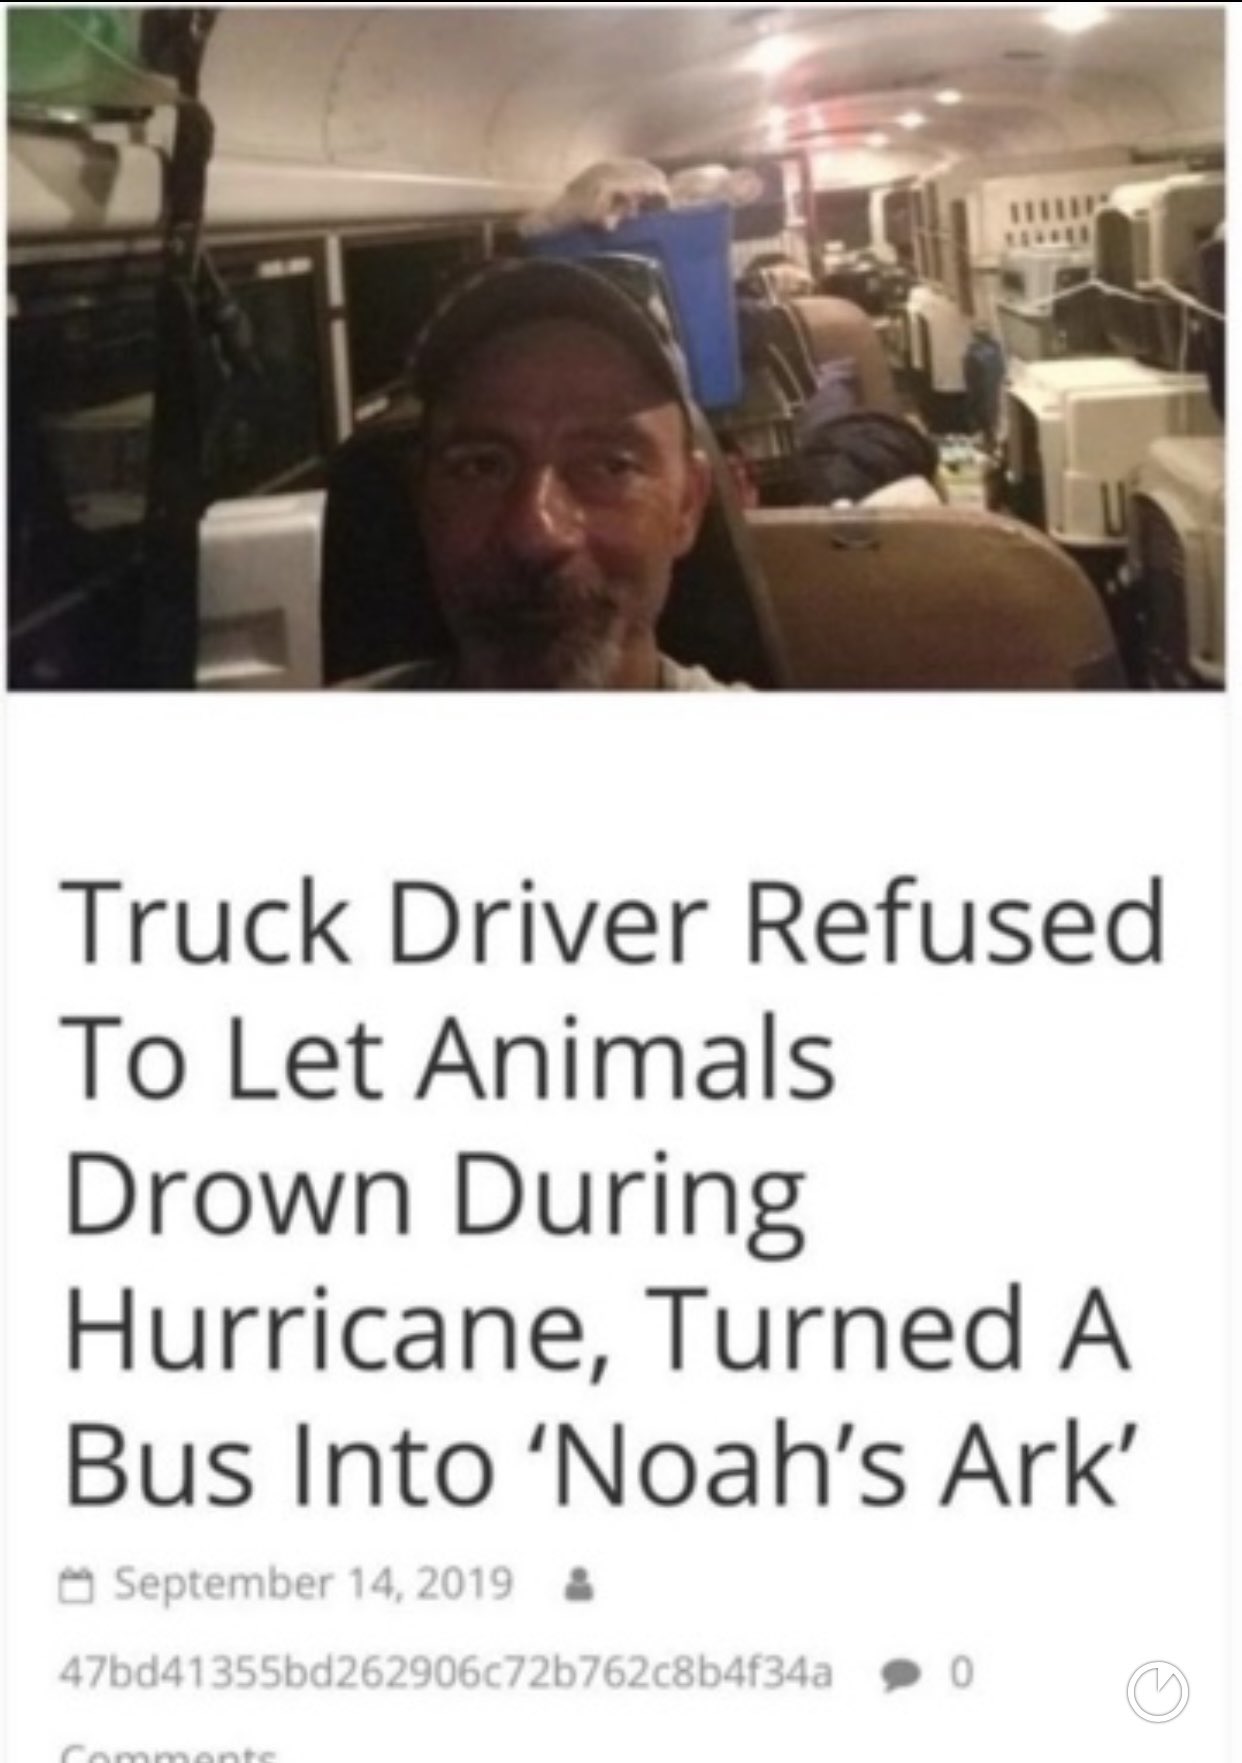 dudes posting their w's - photo caption - Truck Driver Refused To Let Animals Drown During Hurricane, Turned A Bus Into 'Noah's Ark' 47bd41355bd262906c72b762c8b4f34a 0